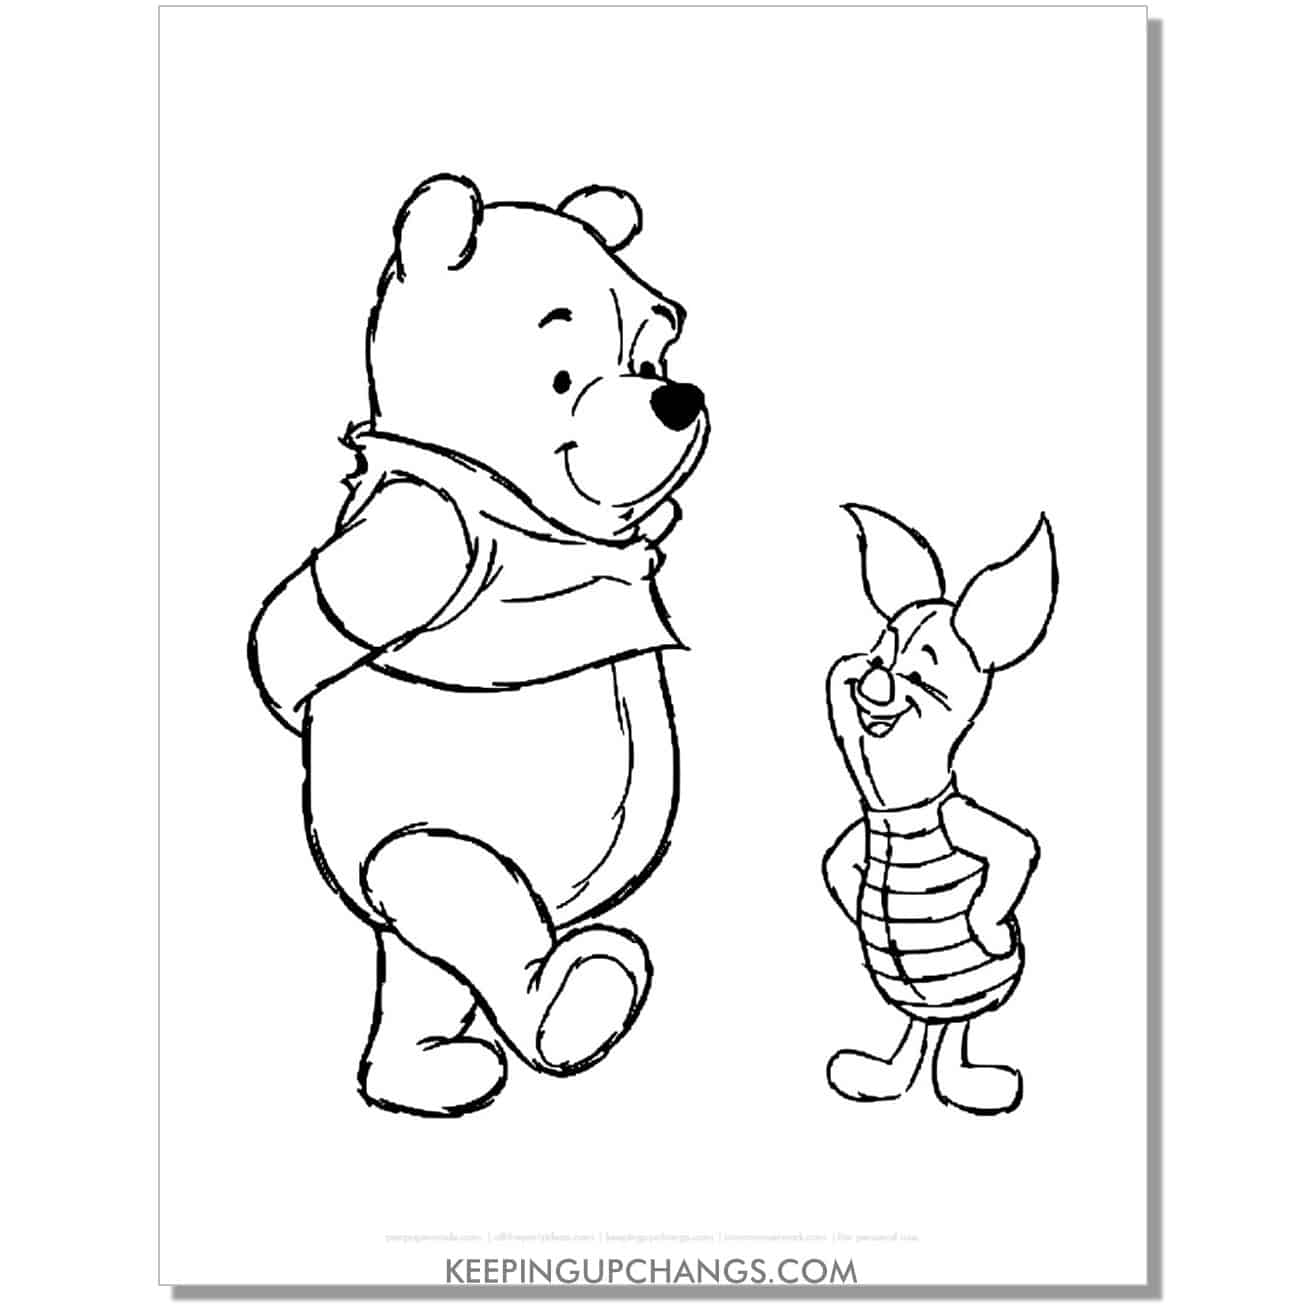 winnie the pooh and piglet standing coloring page, sheet.